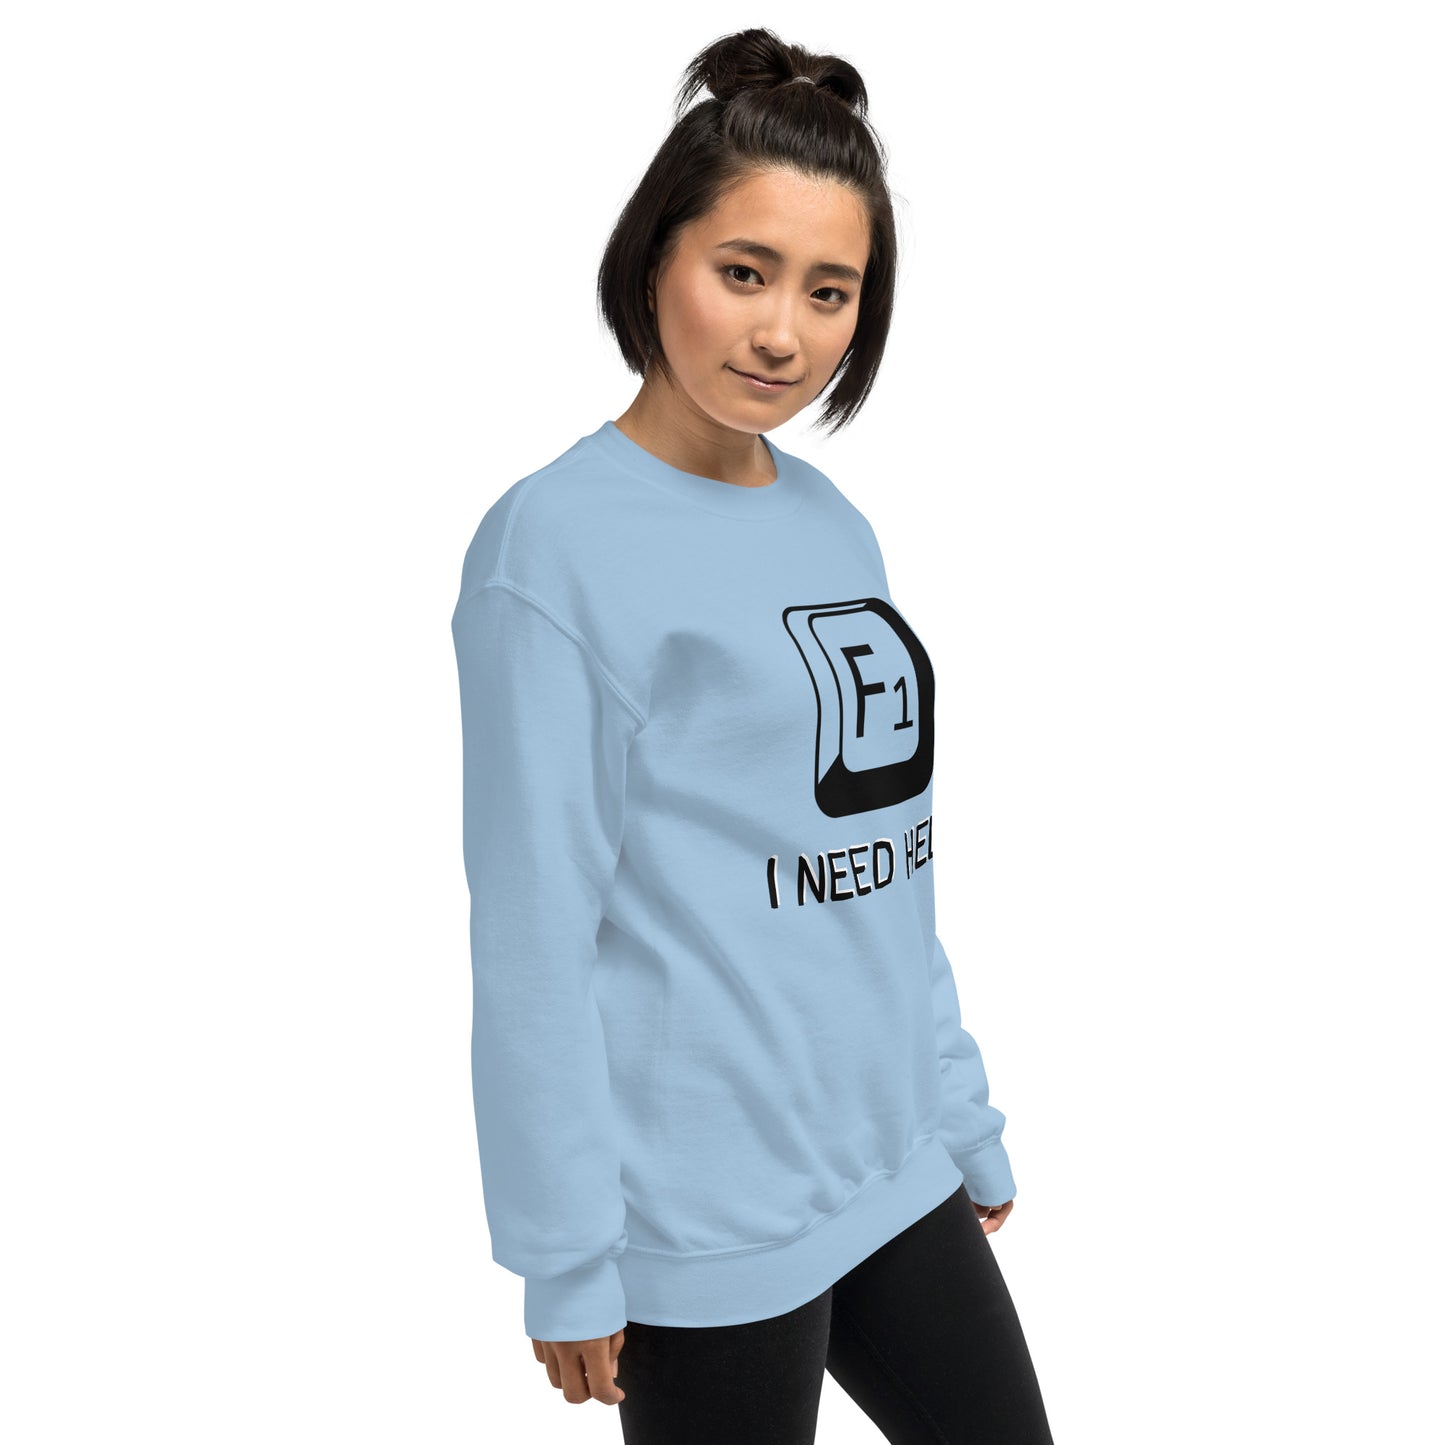 Women with light blue sweatshirt and a picture of F1 key with text "I need help"